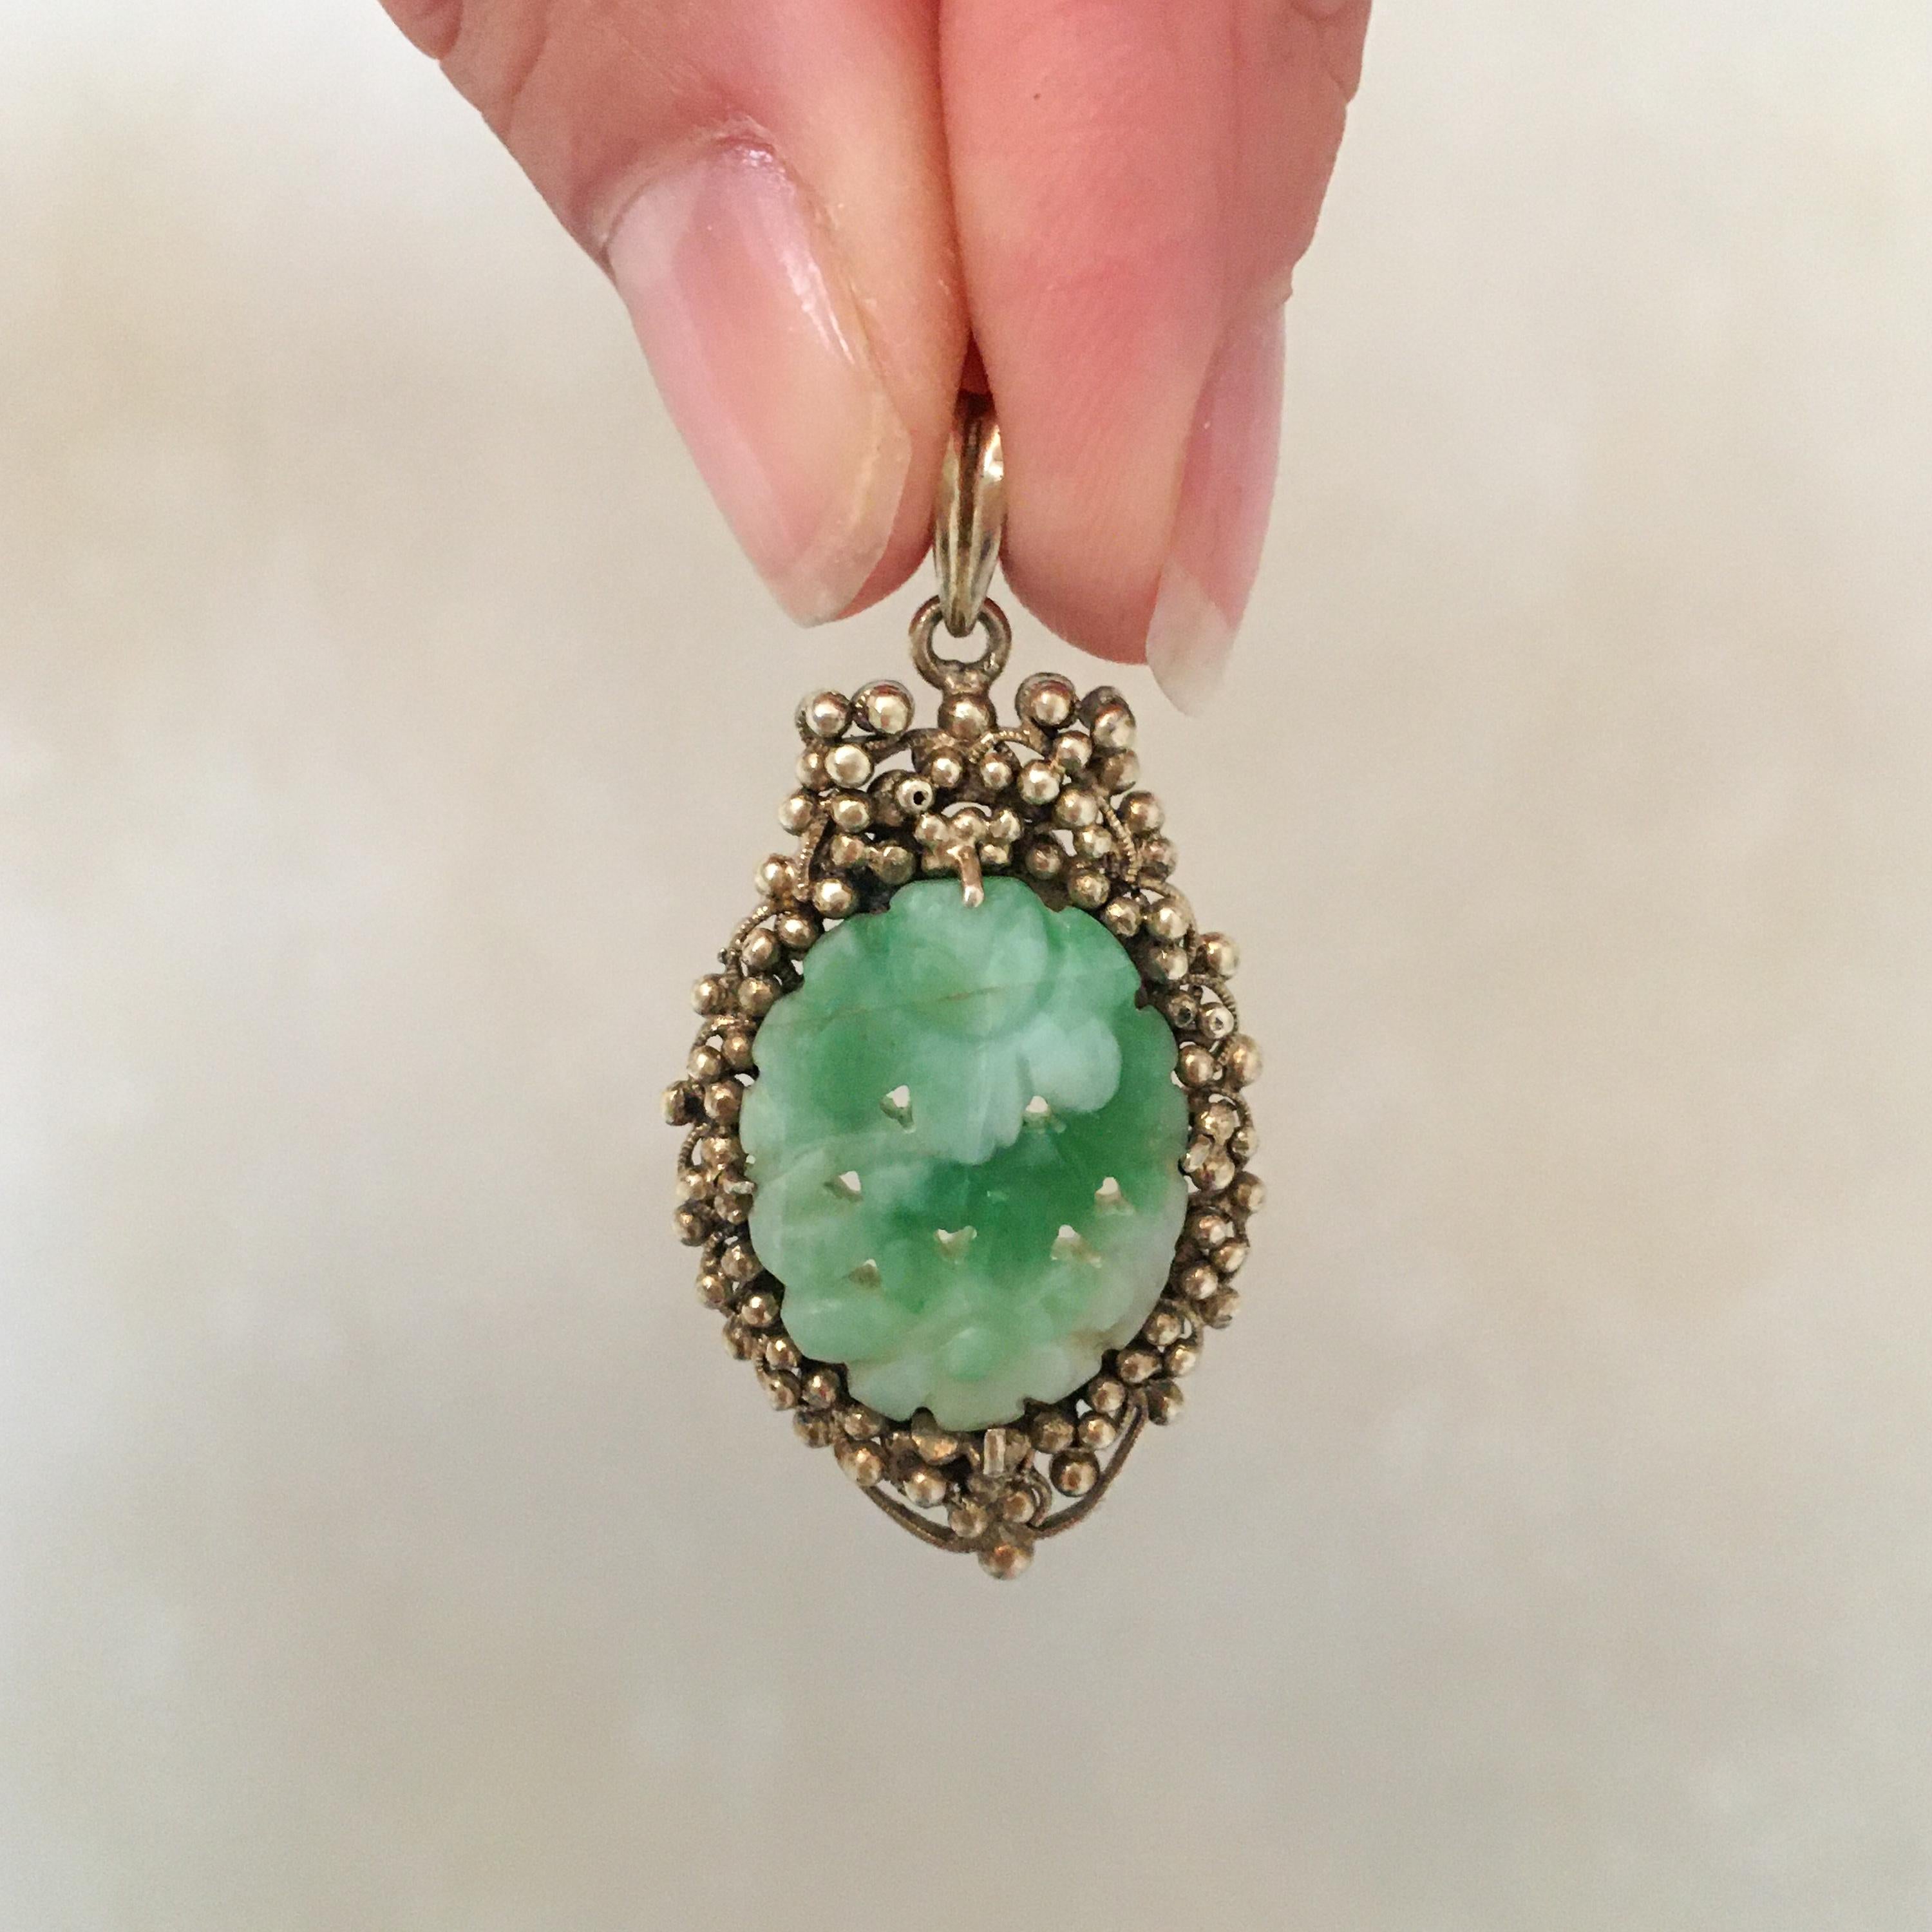 A gilded silver floral and fruit carved jade pendant. The mottled white and green jade is carved into a floral design. The green and white floral carved jade is set between prongs surrounded by the grapes which are made of gilt silver. The exterior